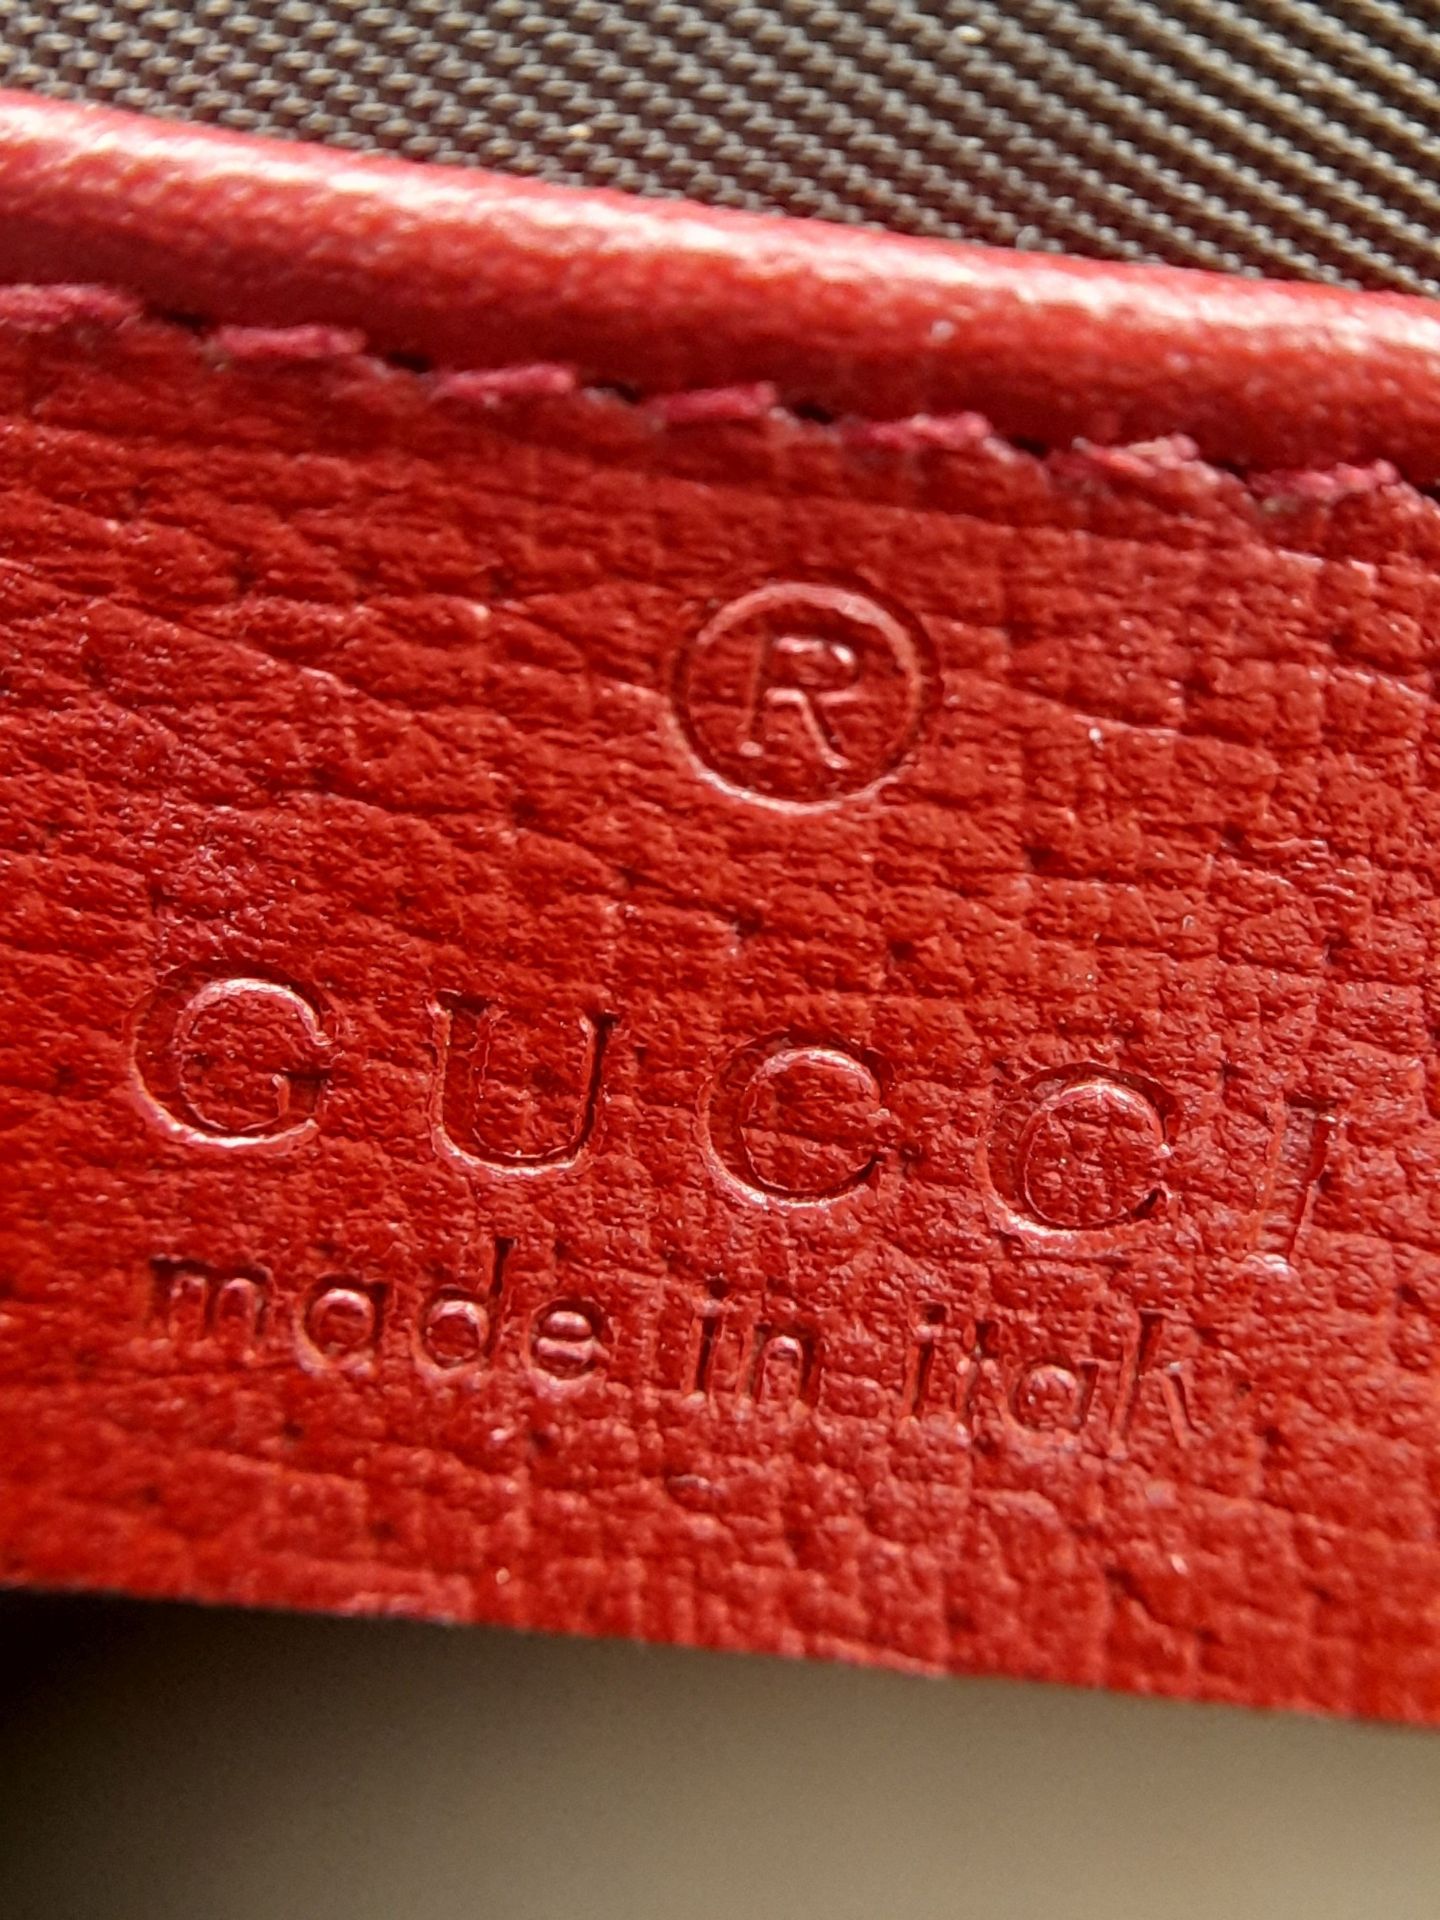 A Gucci Monogram 'Tian' Clutch Bag. Leather exterior with a depiction of a bird in nature, red - Image 7 of 7